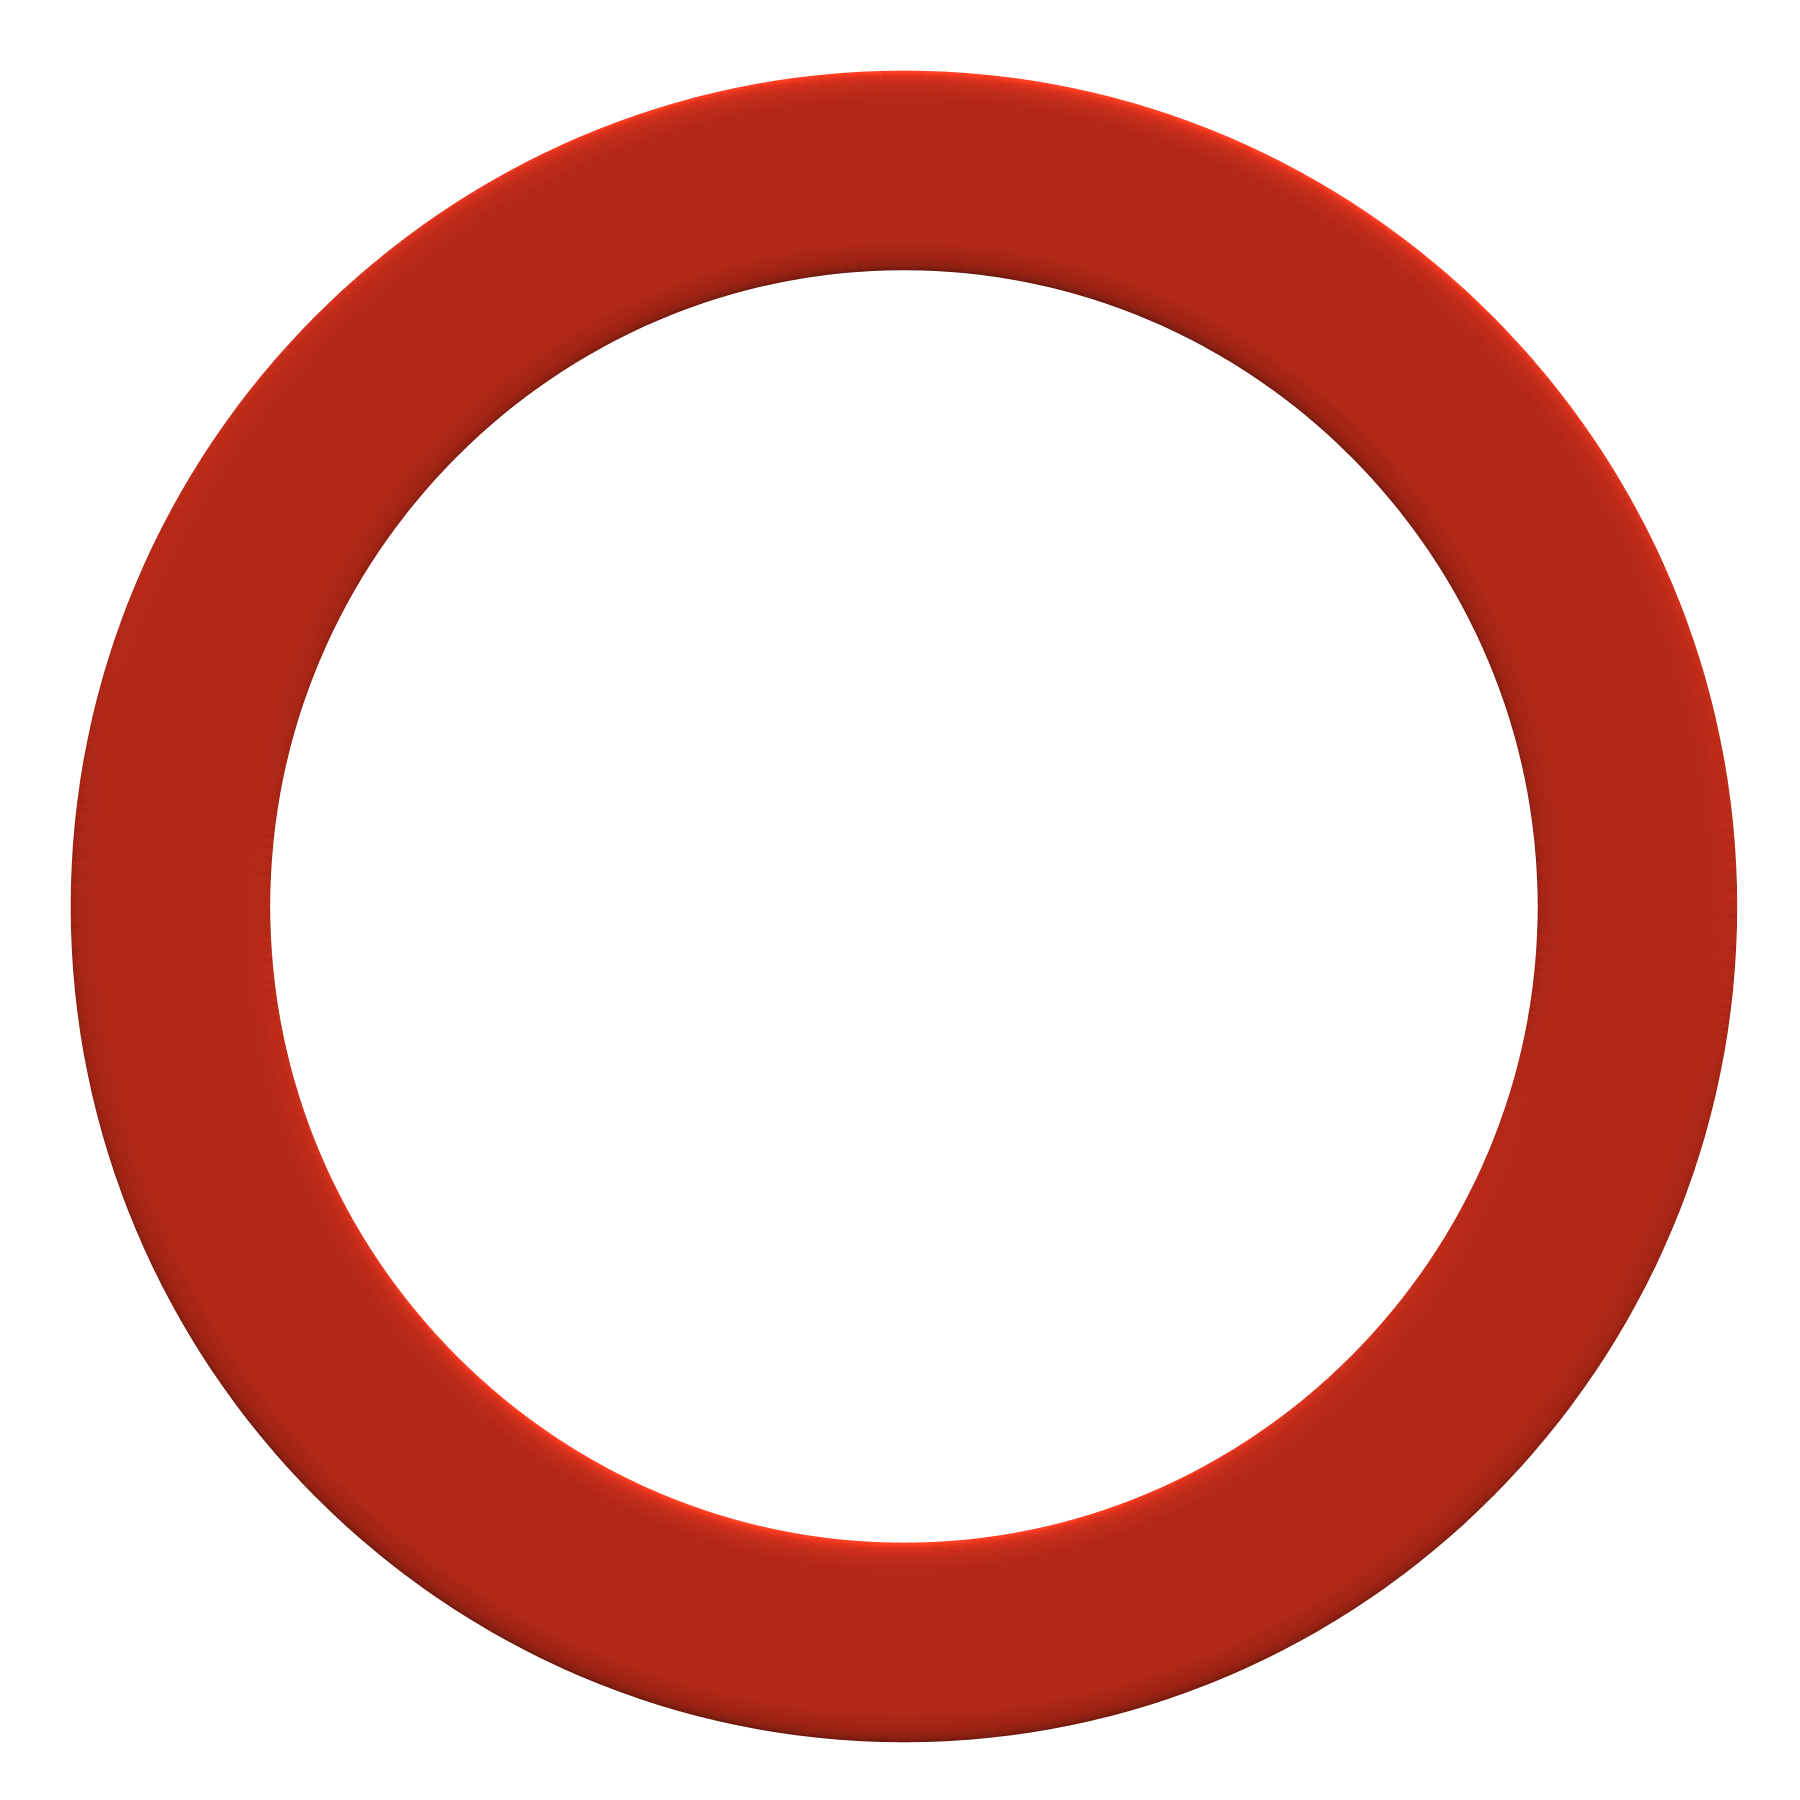 Red Circle Frame Png #44646 - Free Icons and PNG Backgrounds